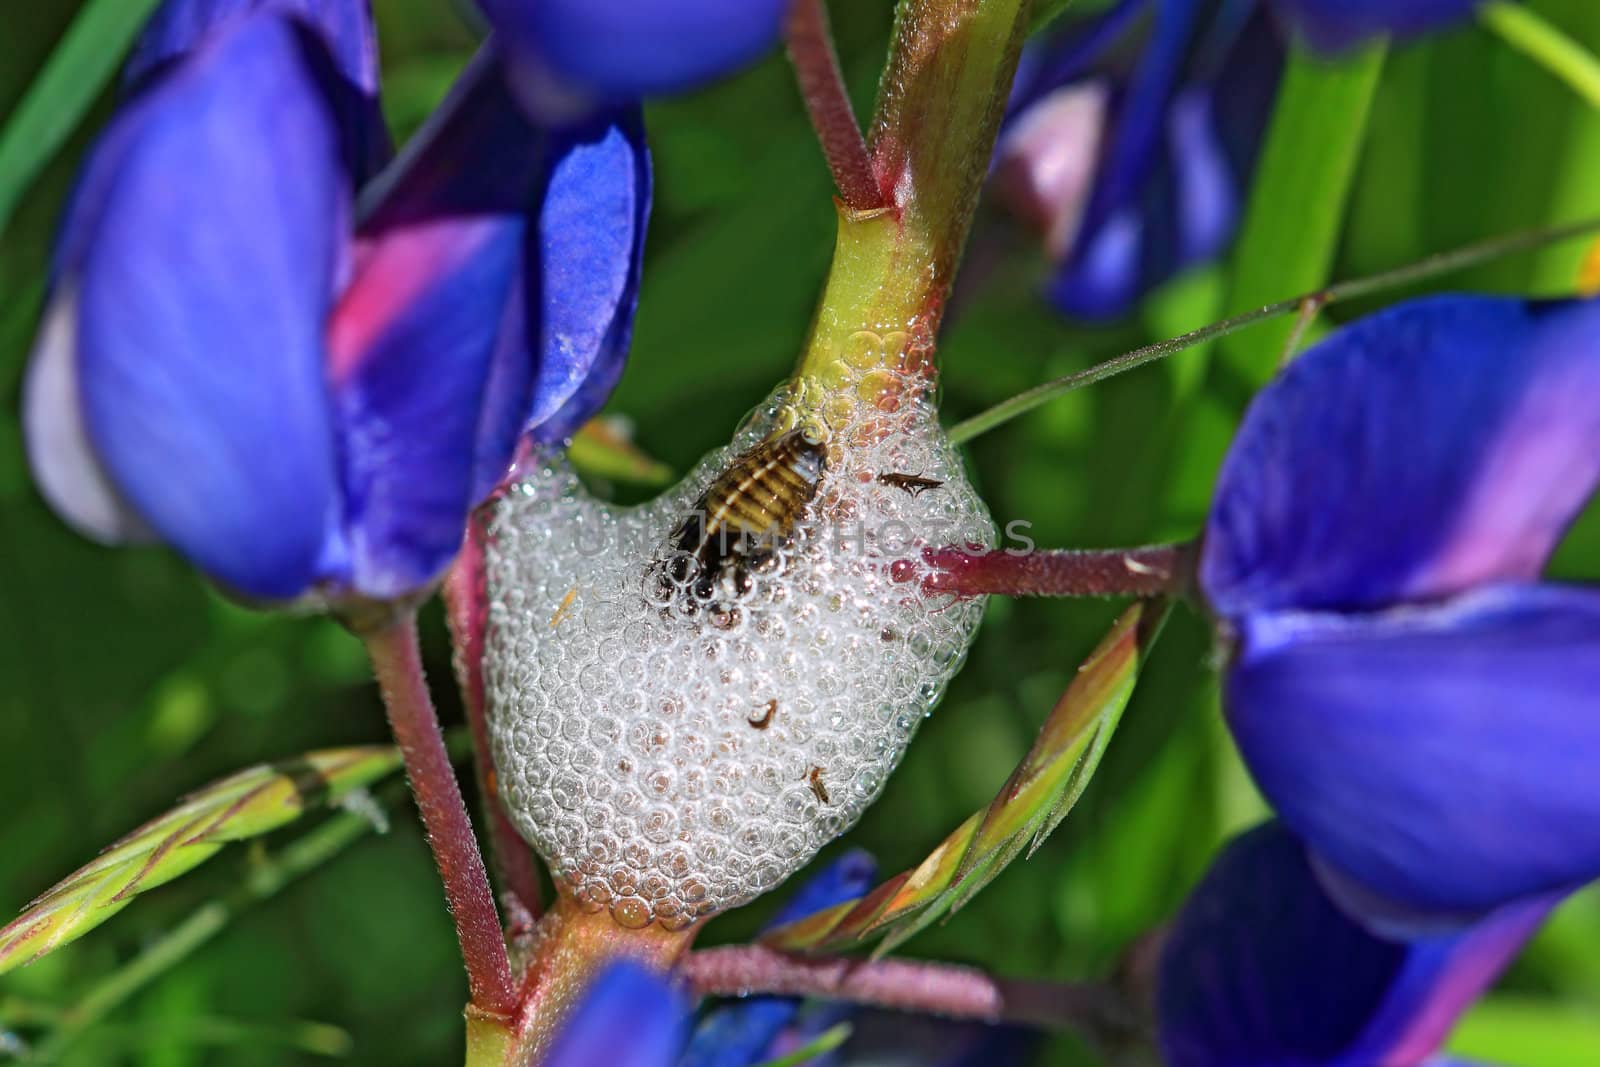 maggot in white spume on lupine stalk by basel101658